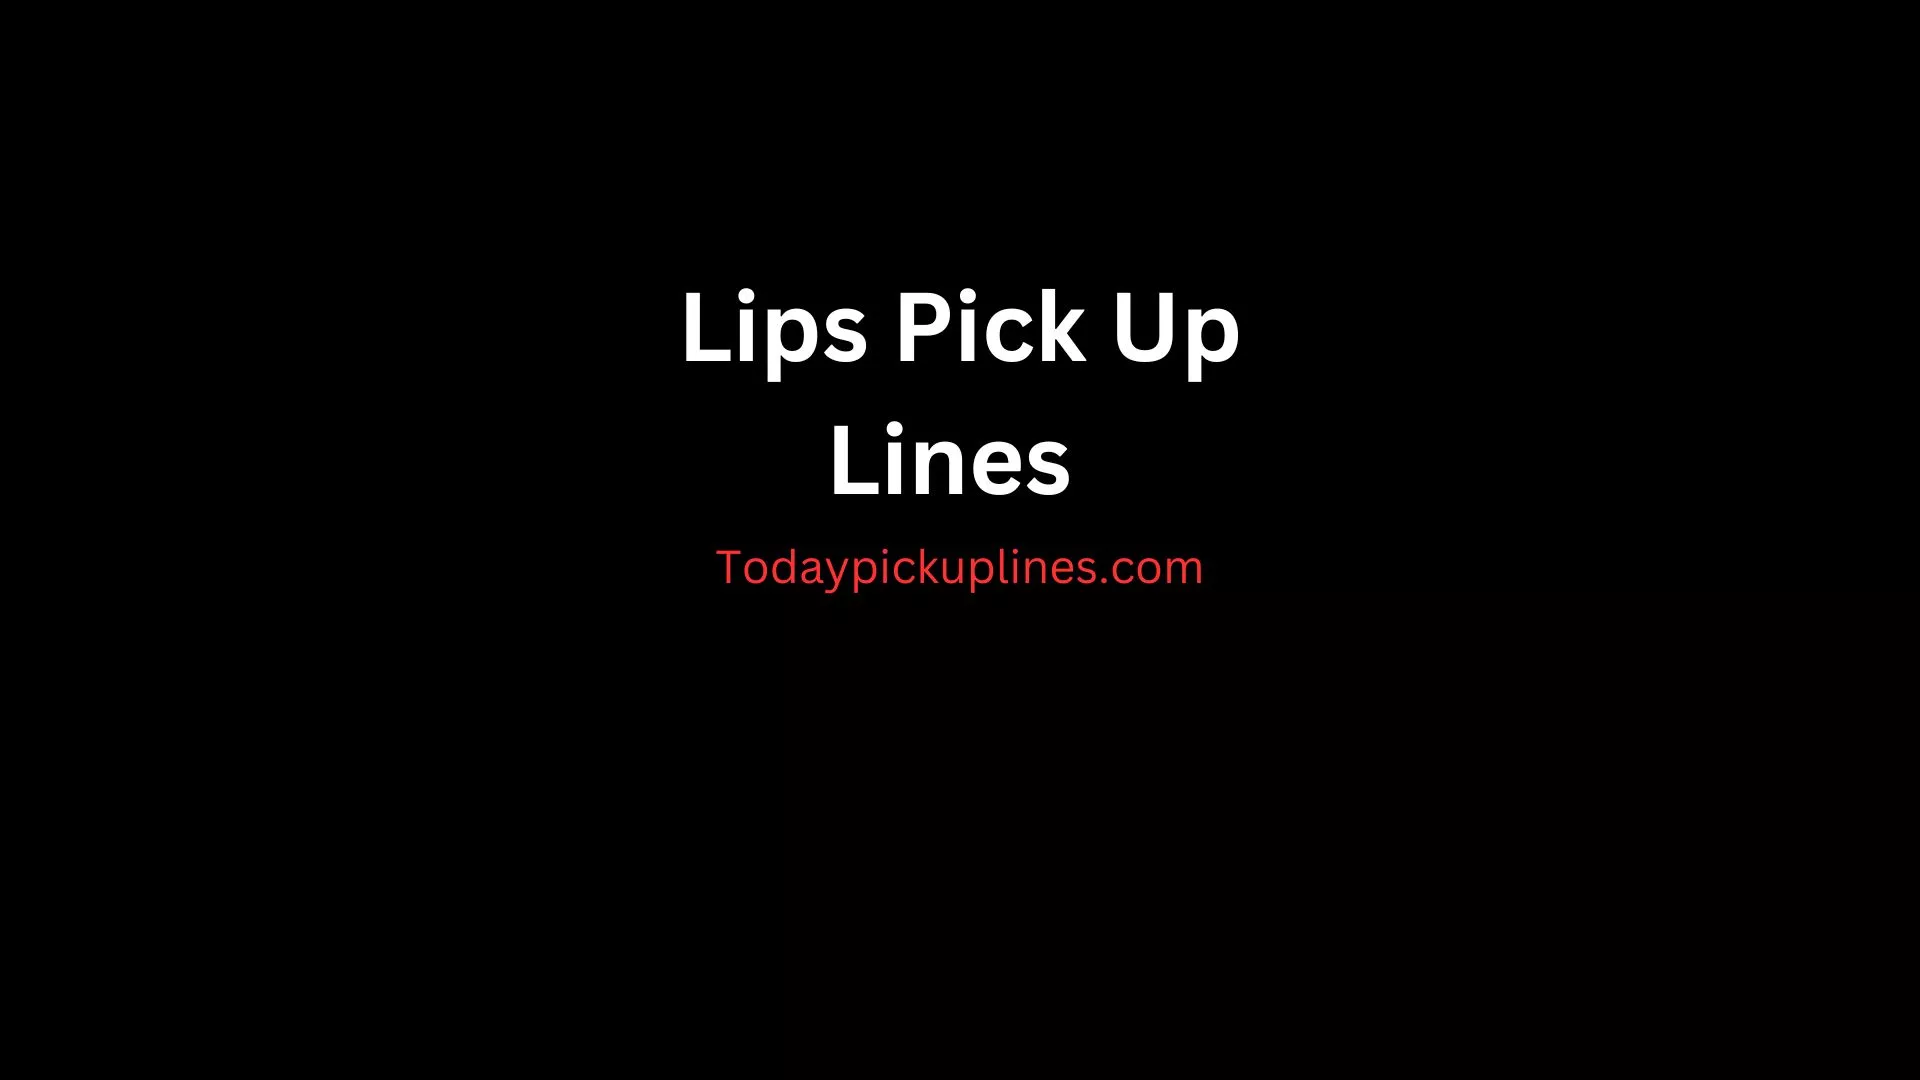 Lips Pick Up Lines